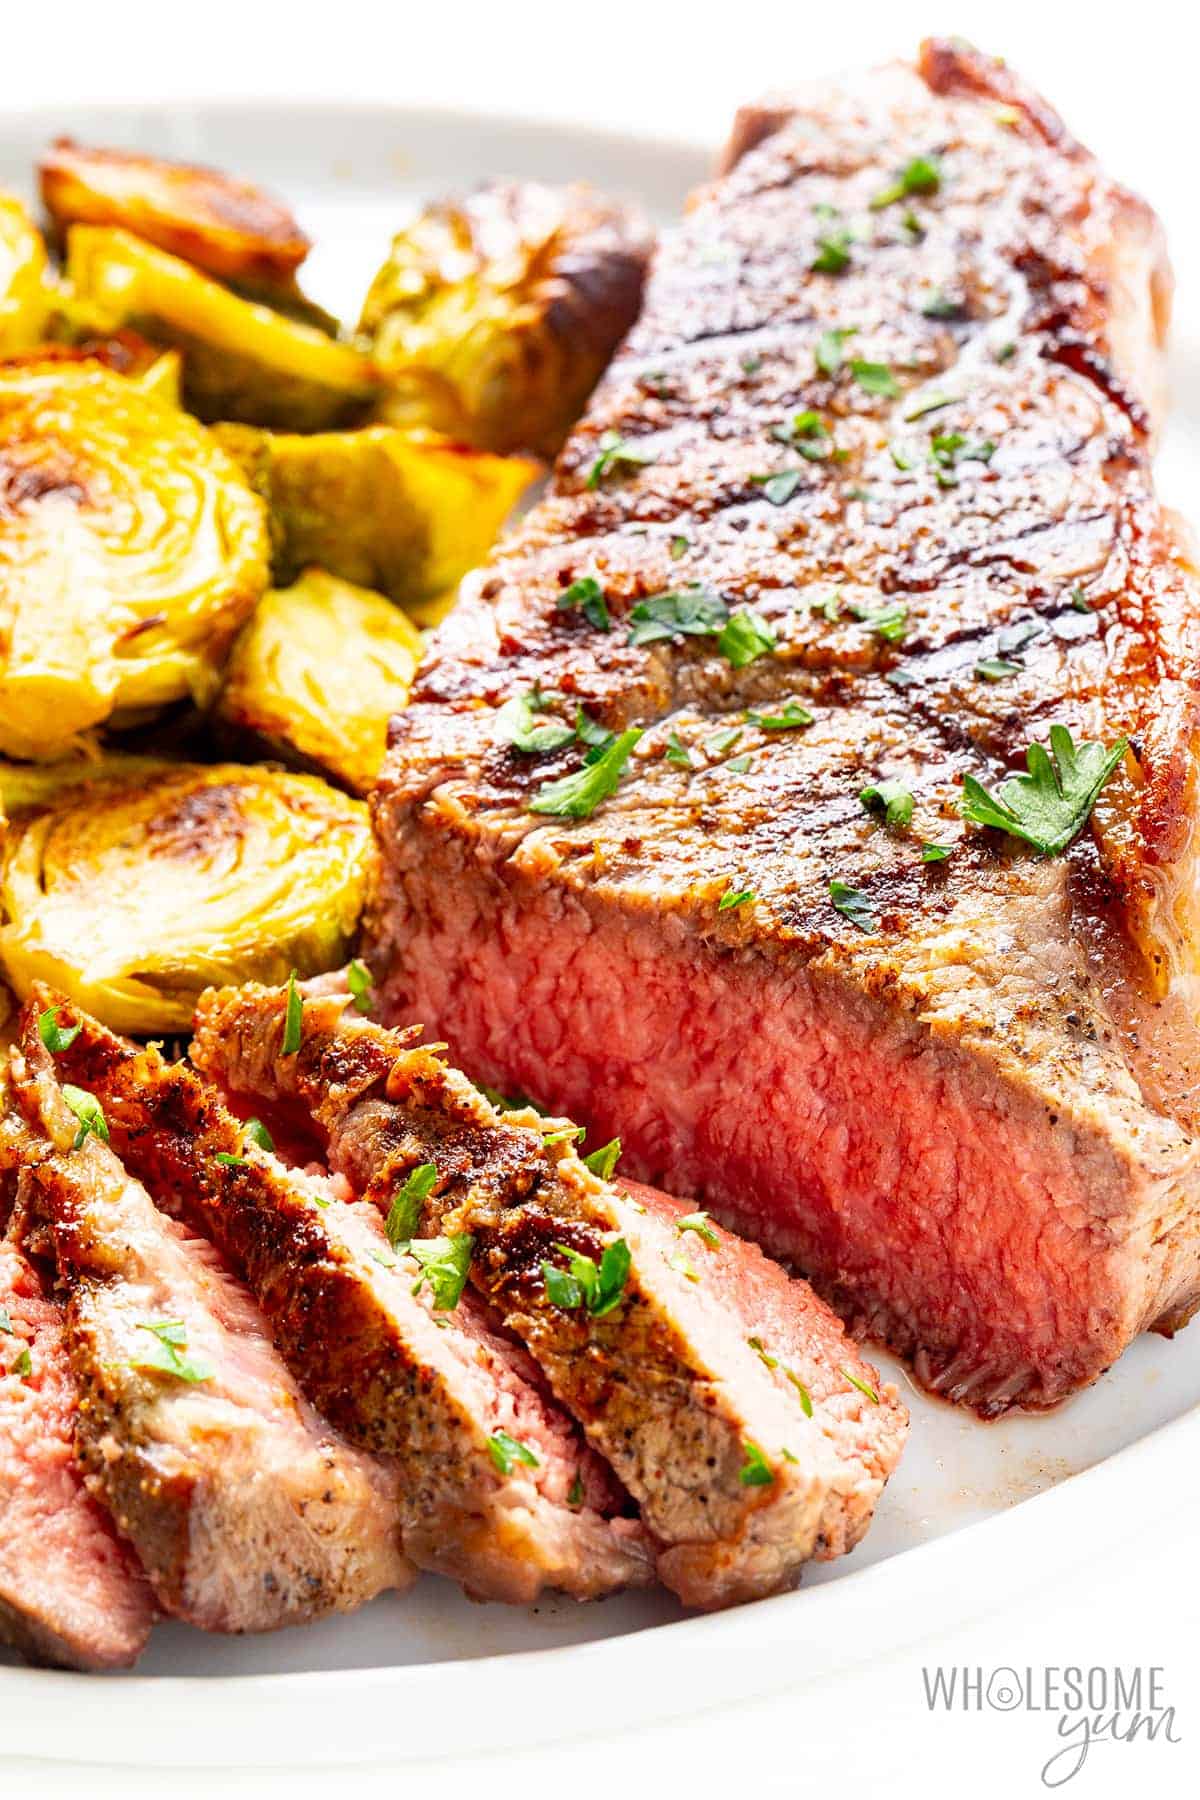 New York strip steak with roasted brussels sprouts.